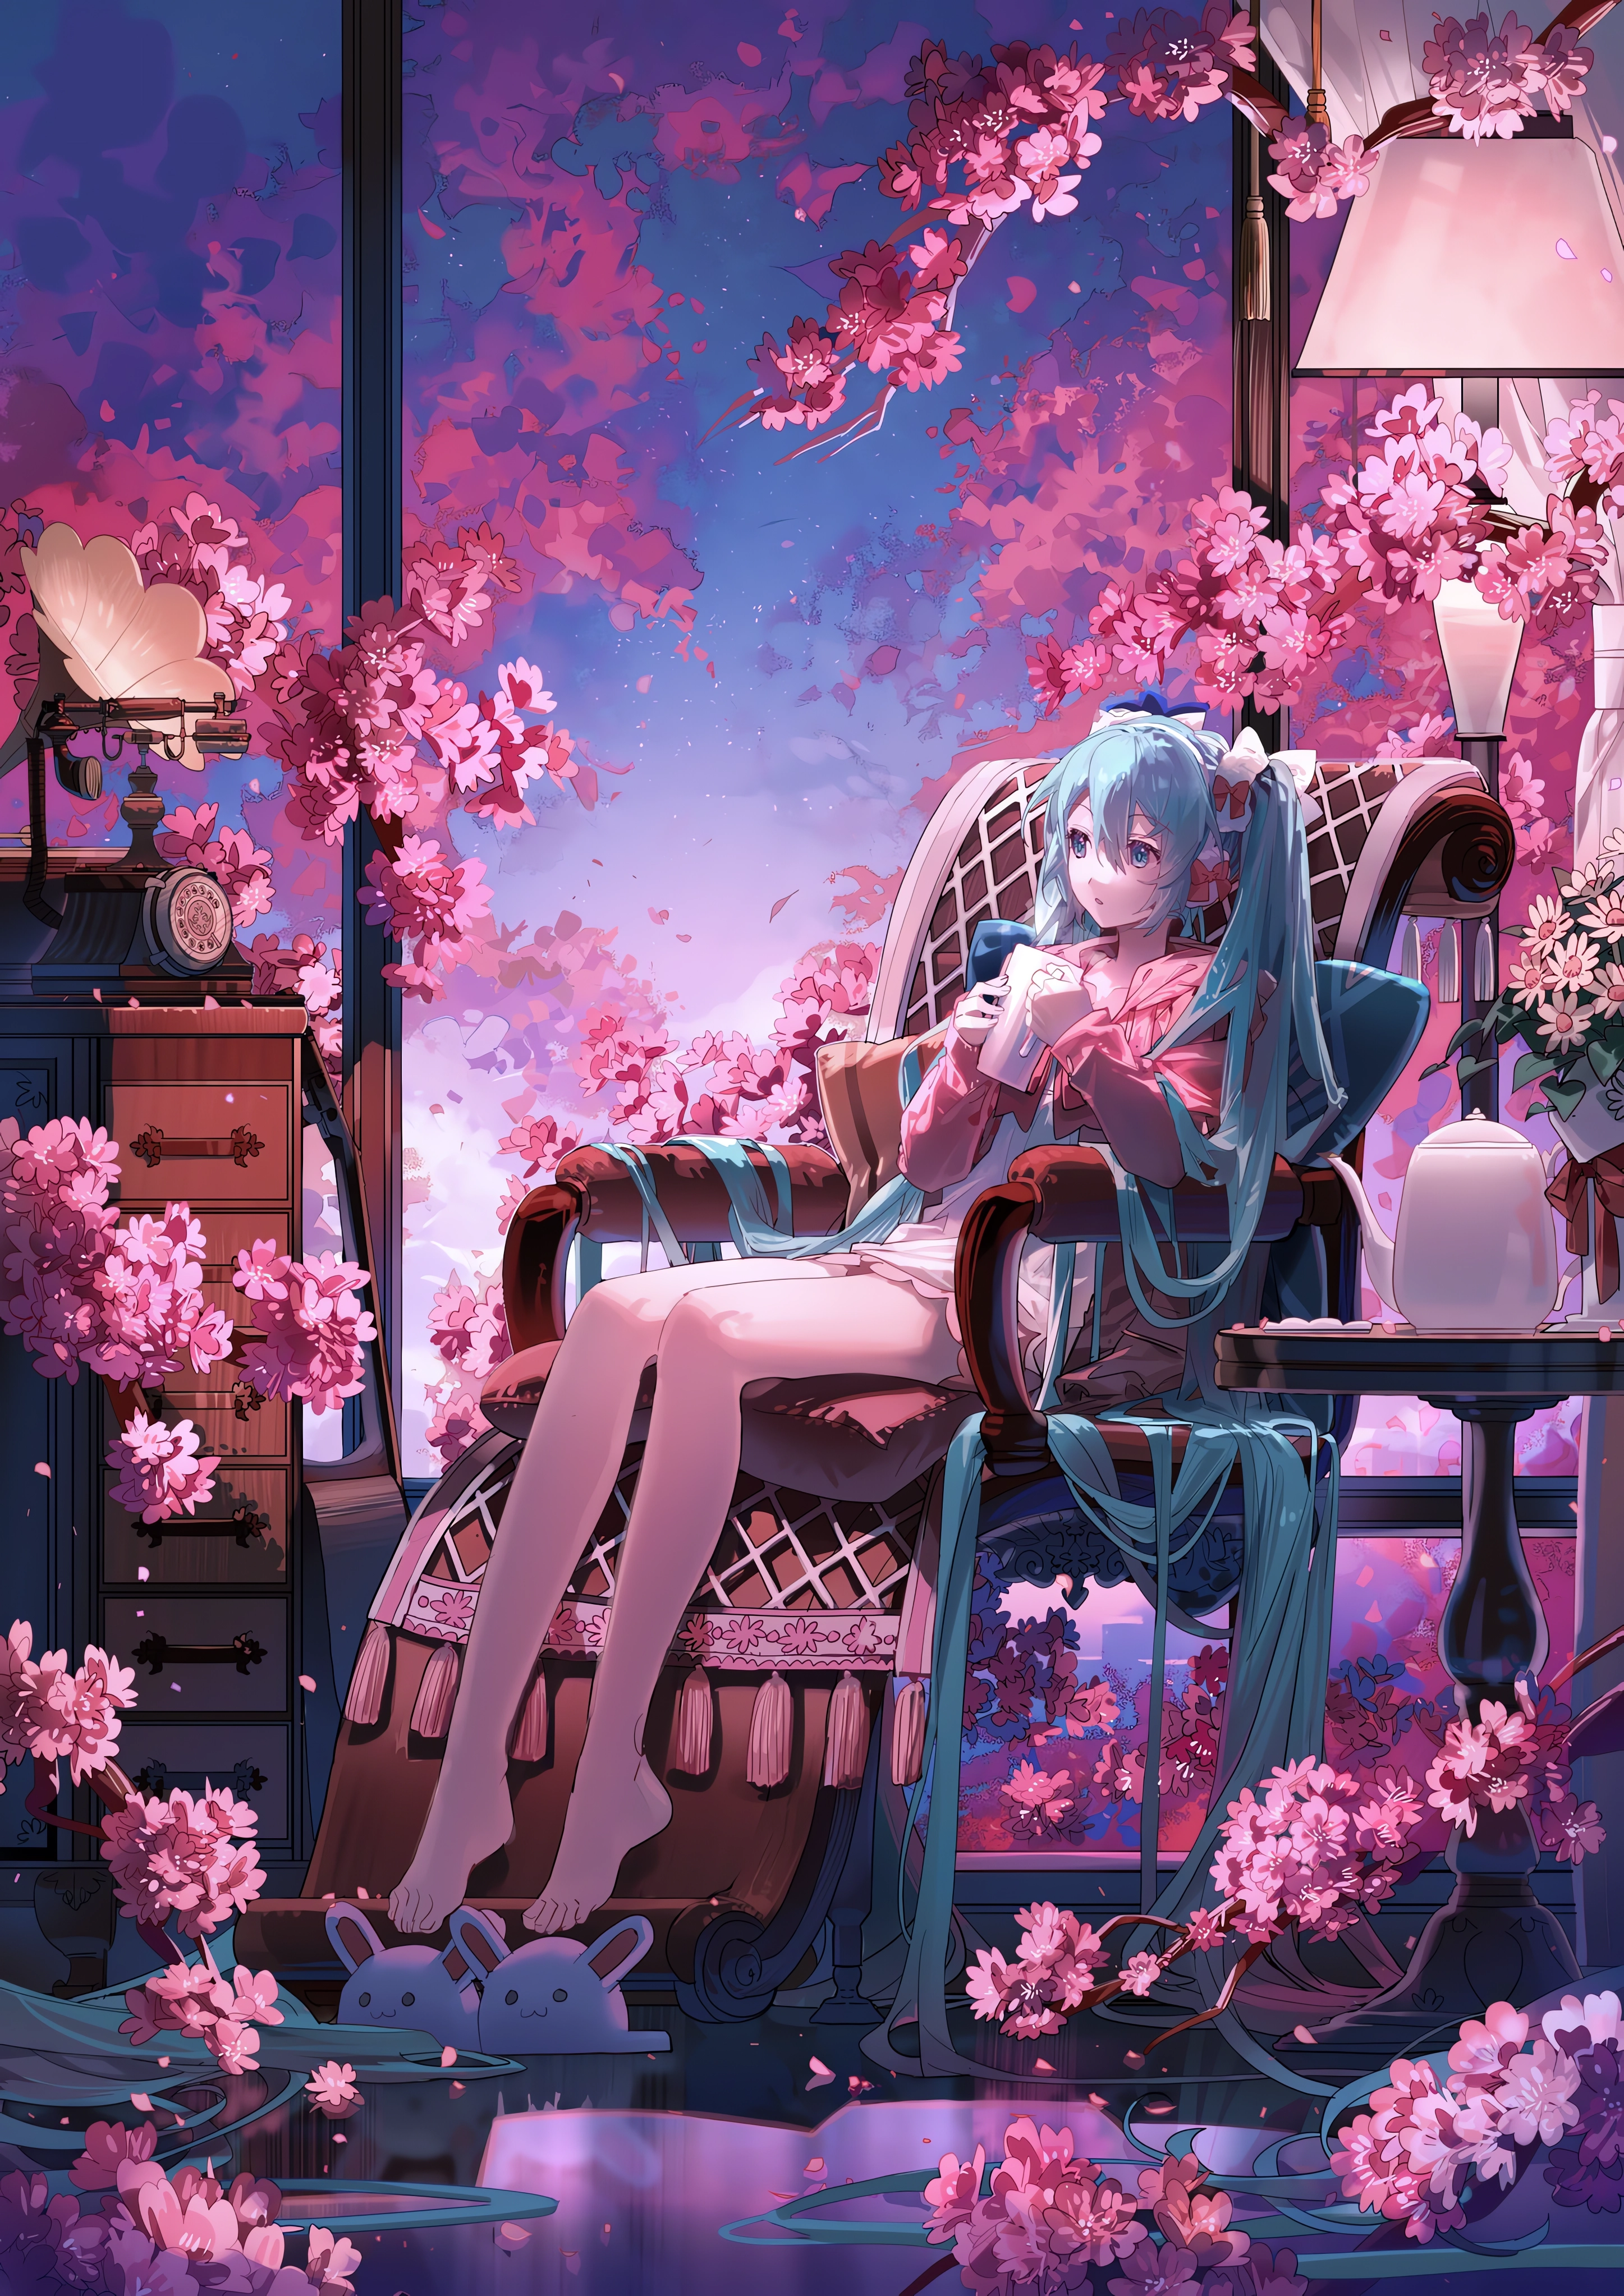 Anime 2894x4092 anime anime girls gramophone Vocaloid Hatsune Miku sitting sky clouds flowers petals twintails cyan hair blue eyes looking away feet portrait display lamp table cherry blossom slippers